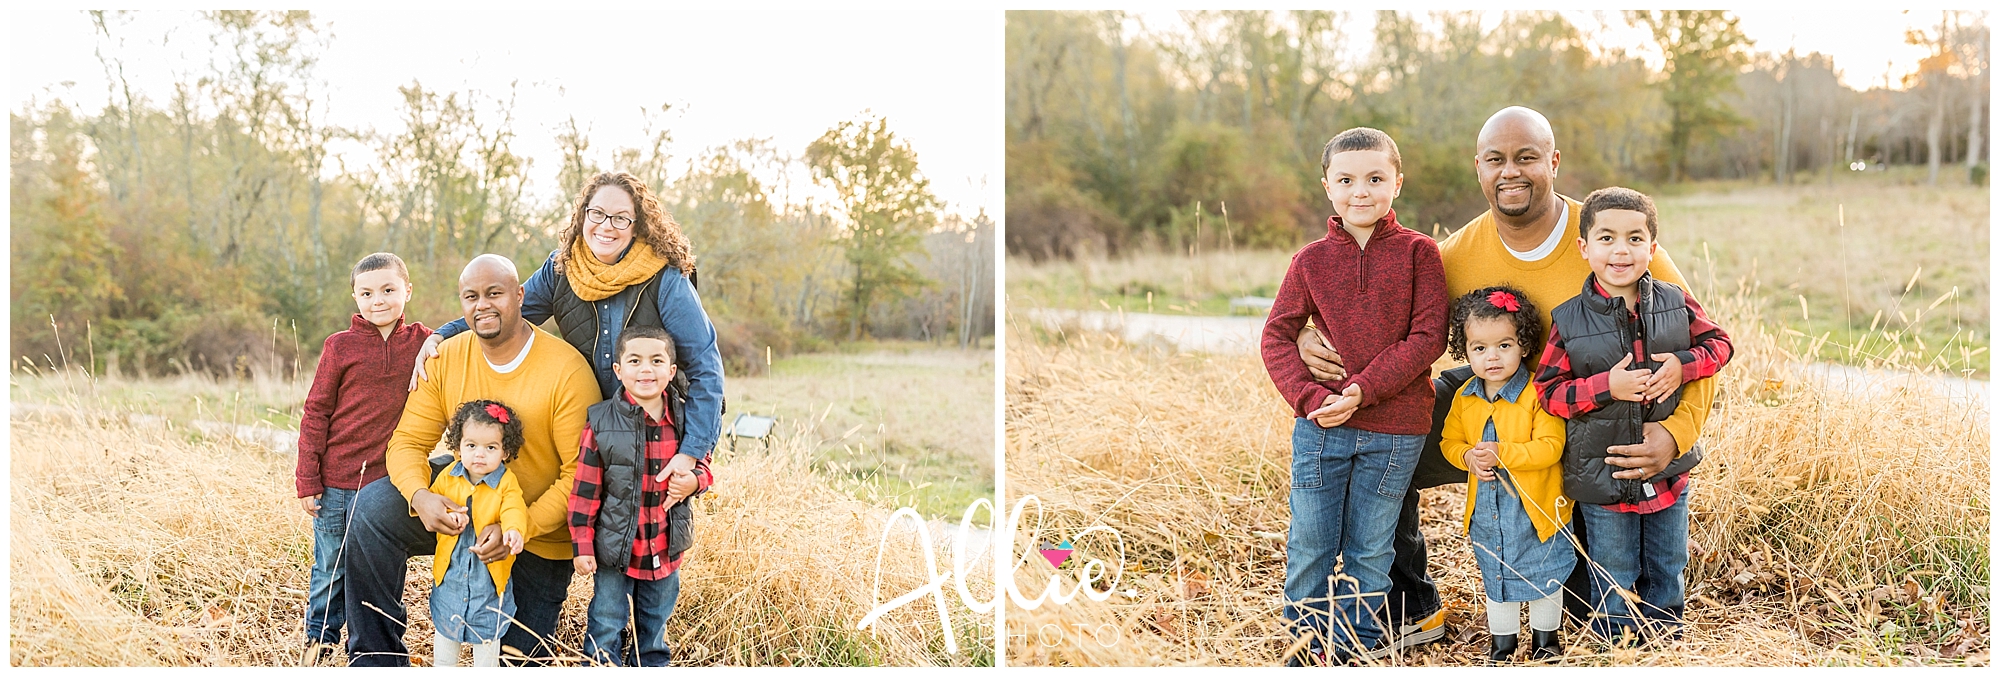 boston area family photographer what to wear fall pictures_0045.jpg